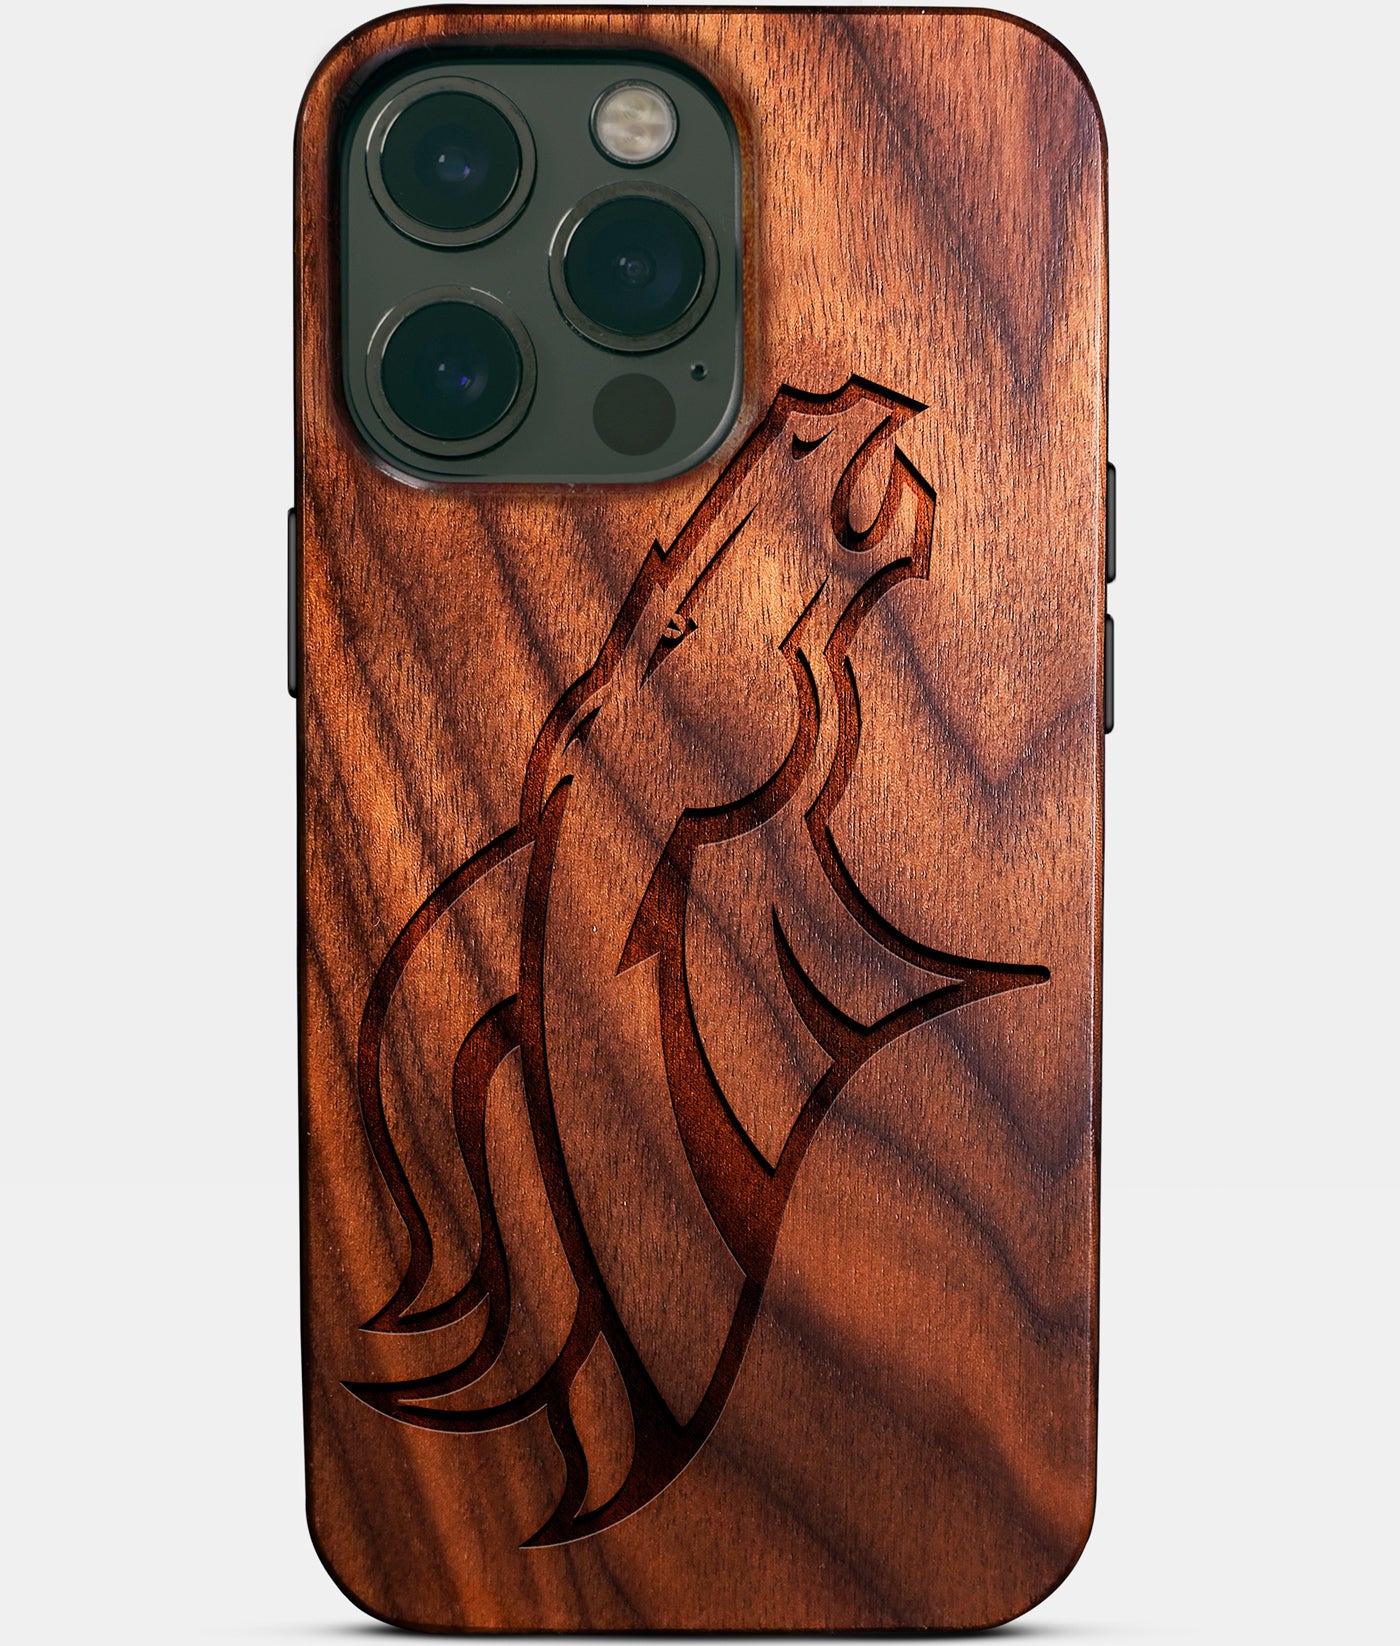 Custom Denver Broncos iPhone 14/14 Pro/14 Pro Max/14 Plus Case - Wood Broncos Cover - Eco-friendly Denver Broncos iPhone 14 Case - Carved Wood Custom Denver Broncos Gift For Him - Monogrammed Personalized iPhone 14 Cover By Engraved In Nature